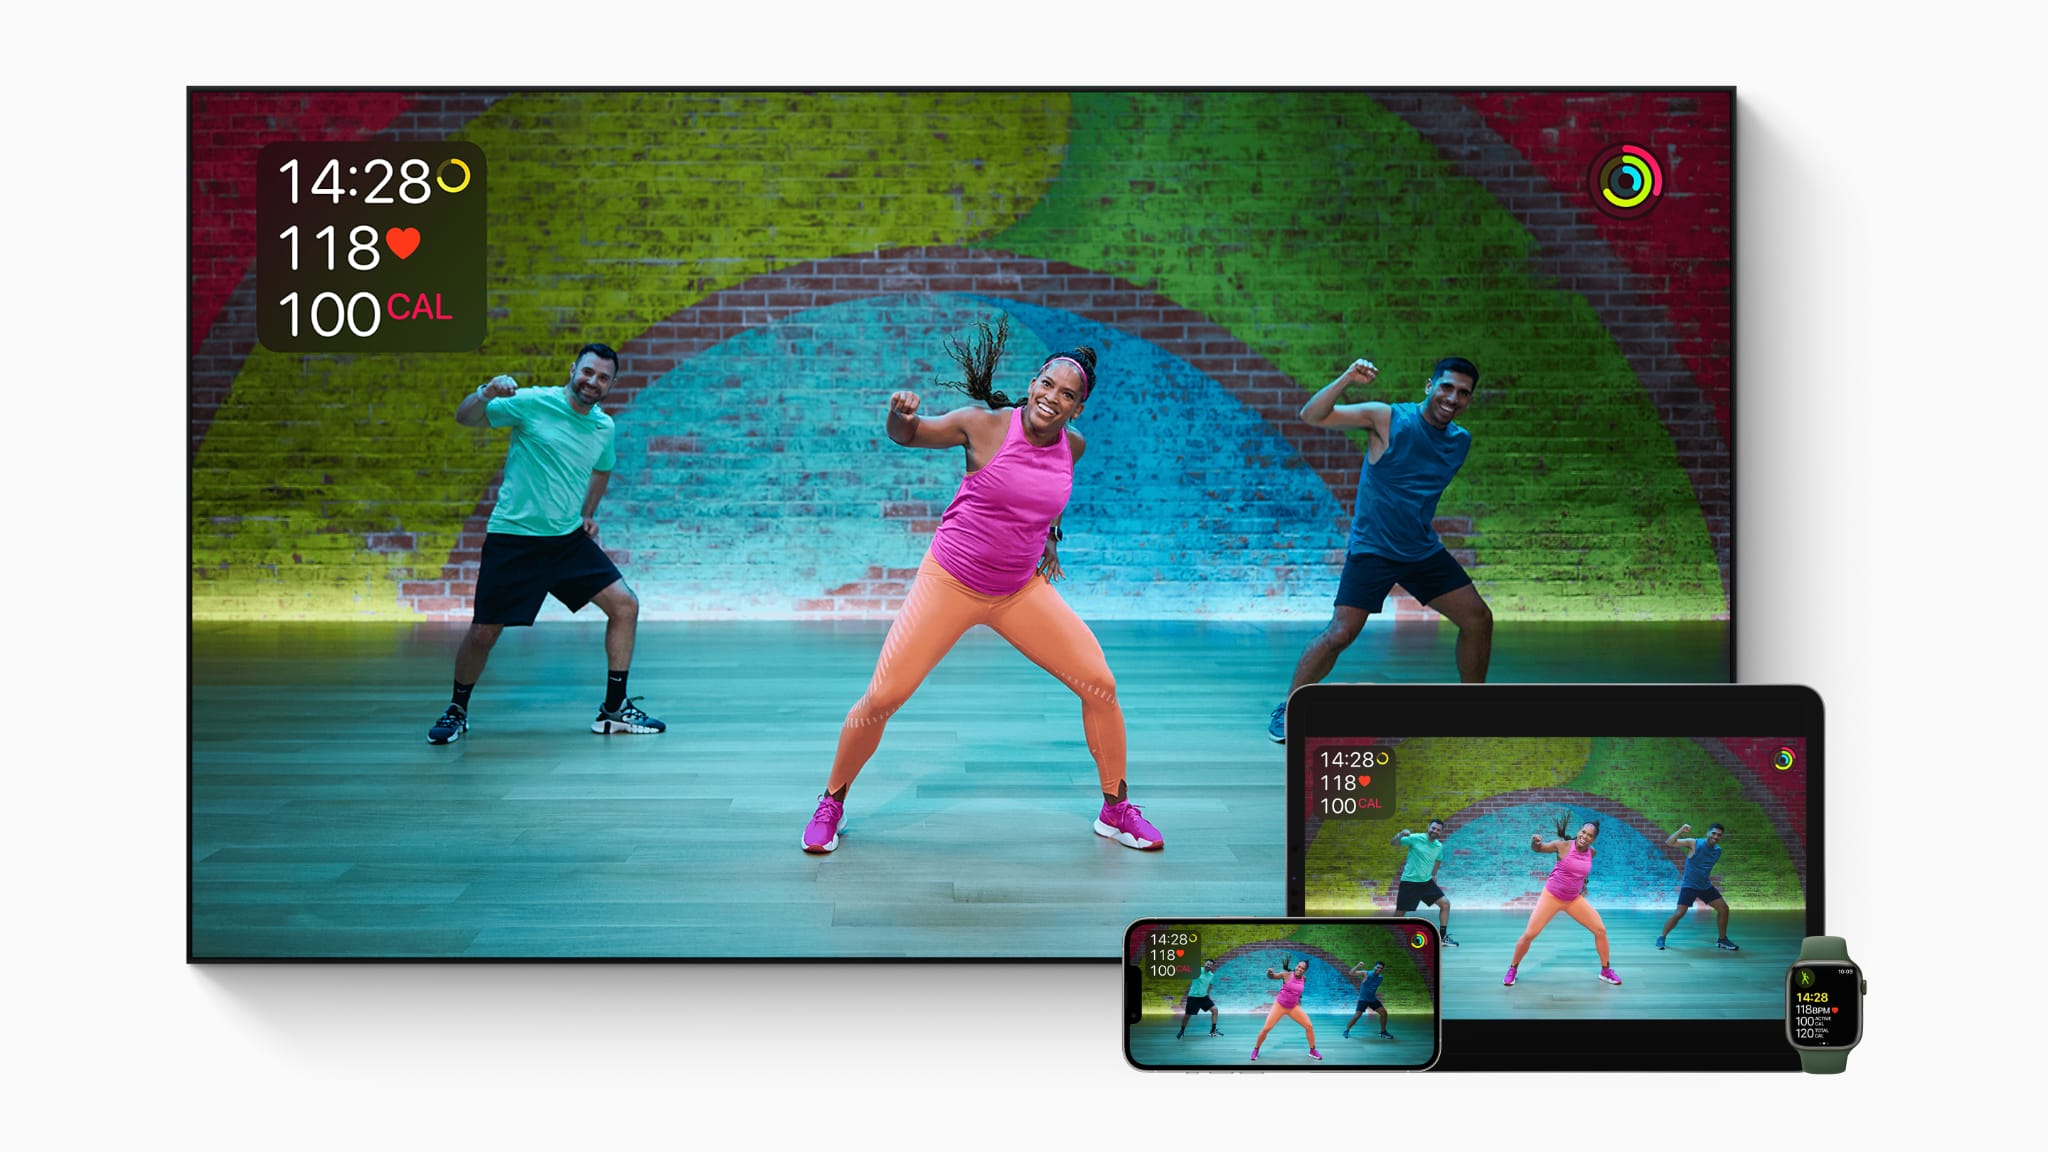 Marketing image showcasing the new dance workouts and themed collections for Apple Fitness+ subscribers on iPhone, iPad, Apple Watch and Apple TV